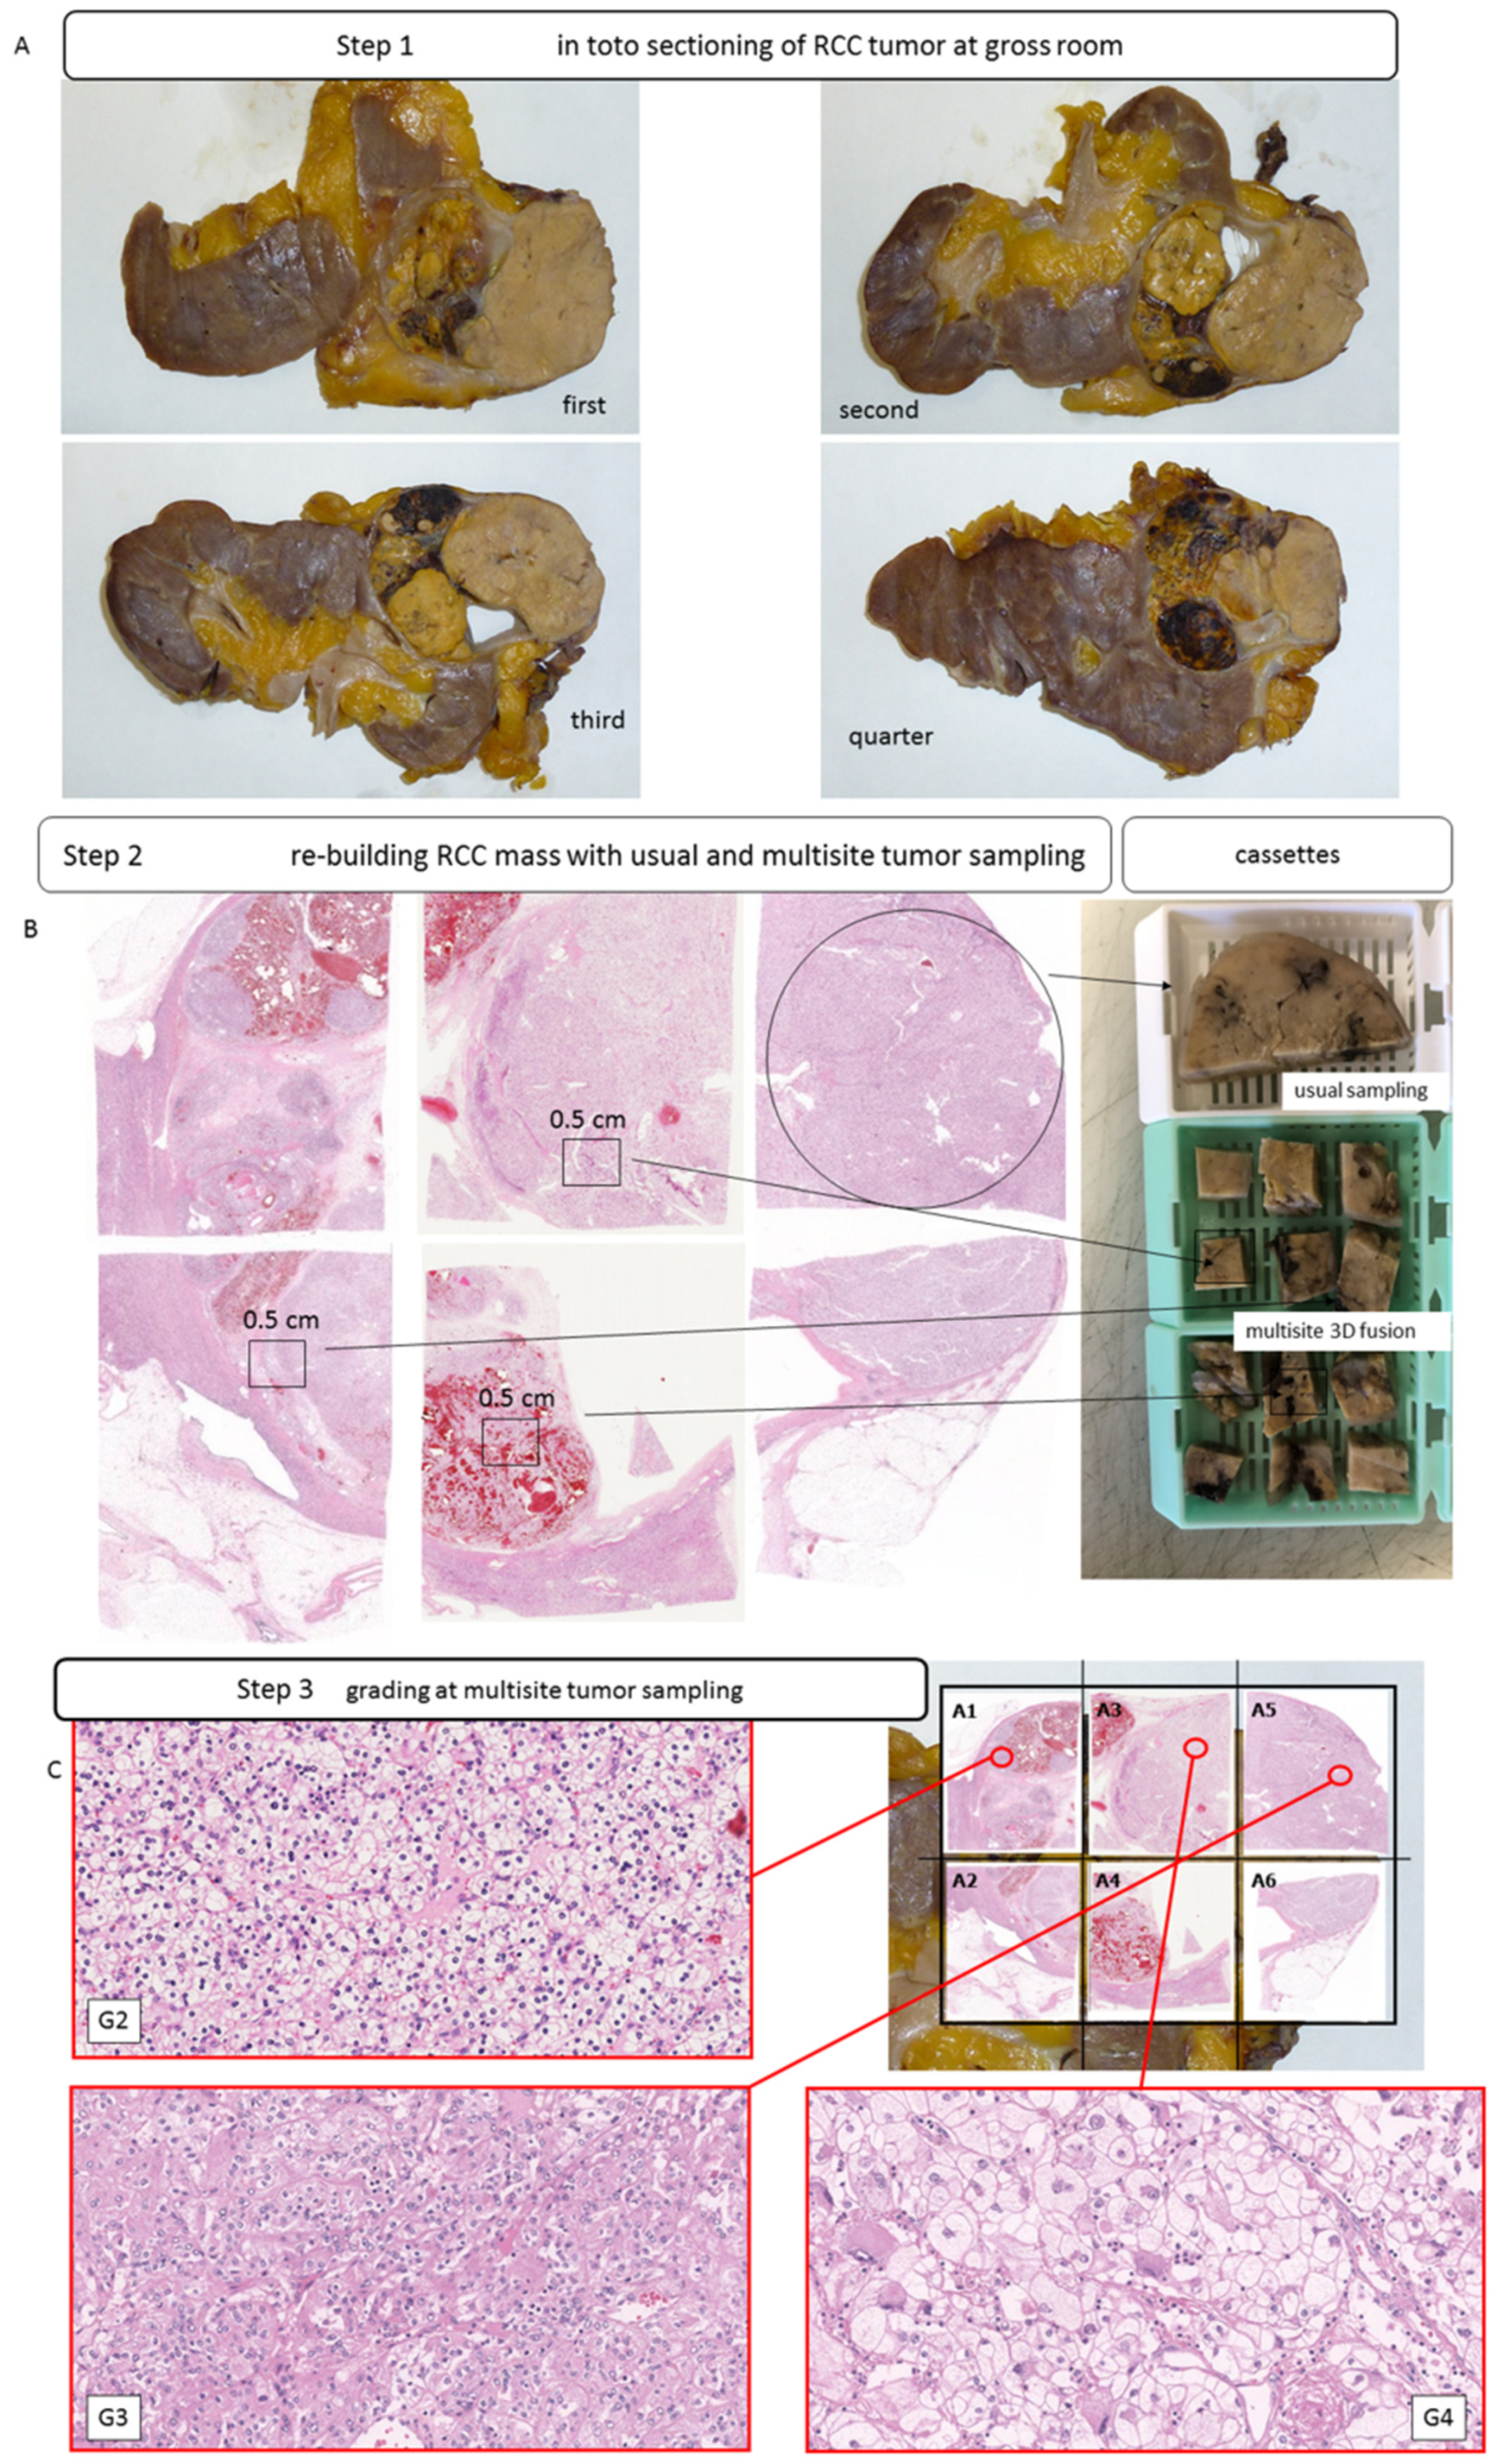 JPM | Free Full-Text | Validation of a Novel Three-Dimensional (3D Fusion)  Gross Sampling Protocol for Clear Cell Renal Cell Carcinoma to Overcome  Intratumoral Heterogeneity: The Meet-Uro 18 Study | HTML